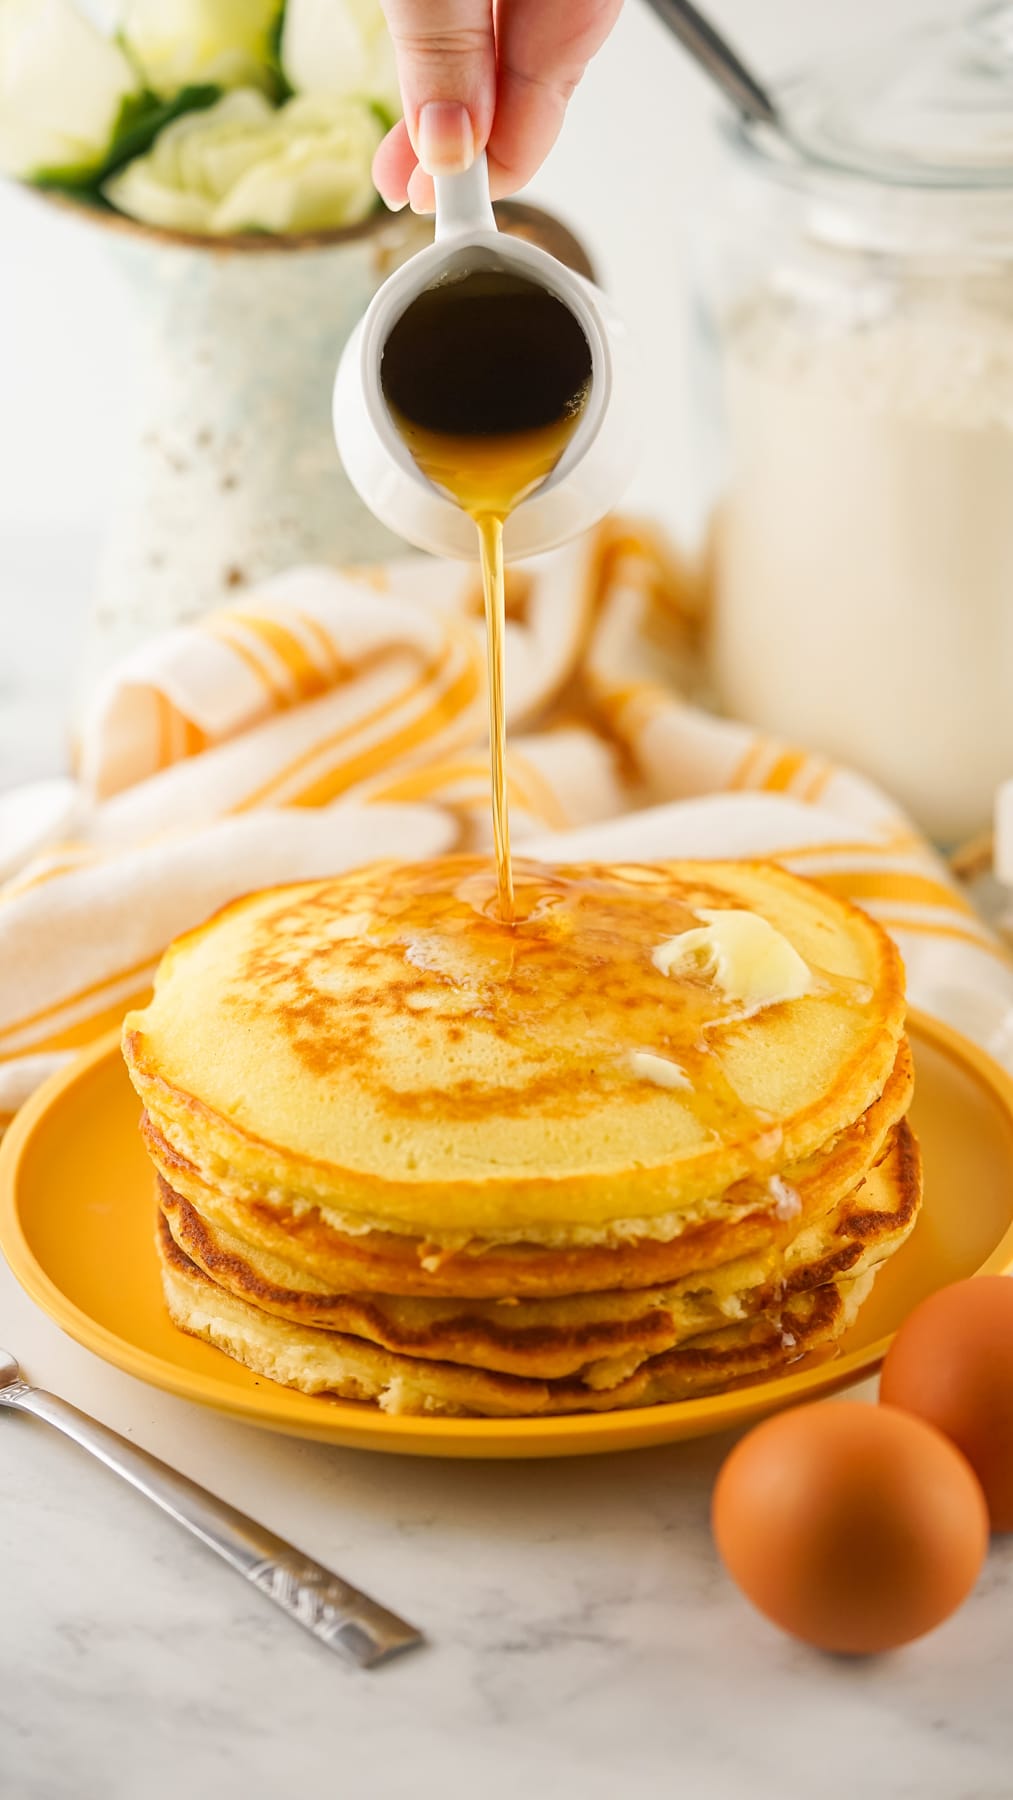 Syrup being drizzled over a stack of pancakes